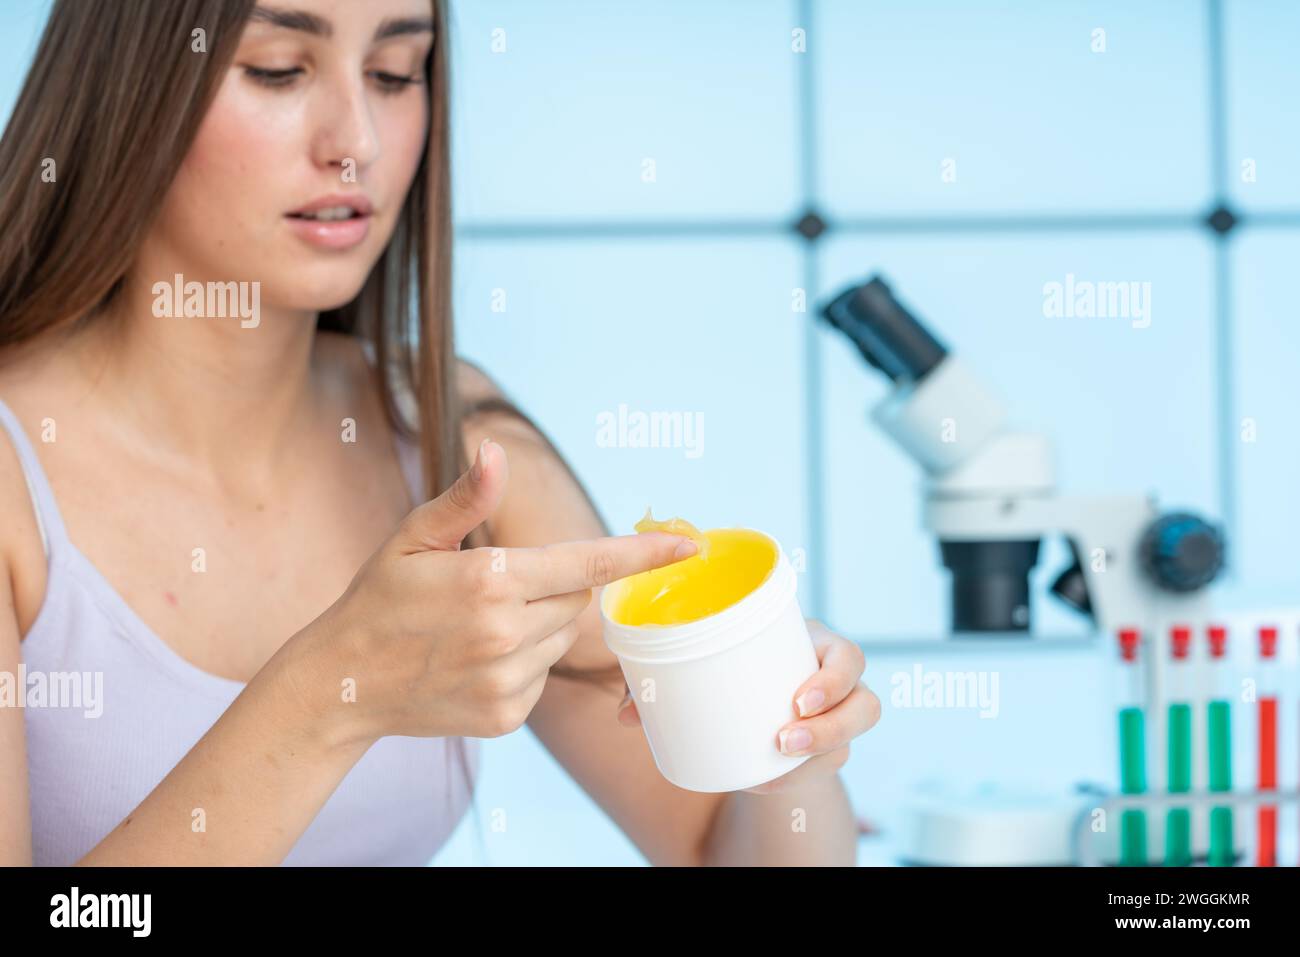 young woman uses medical ointment from a plastic jar Stock Photo